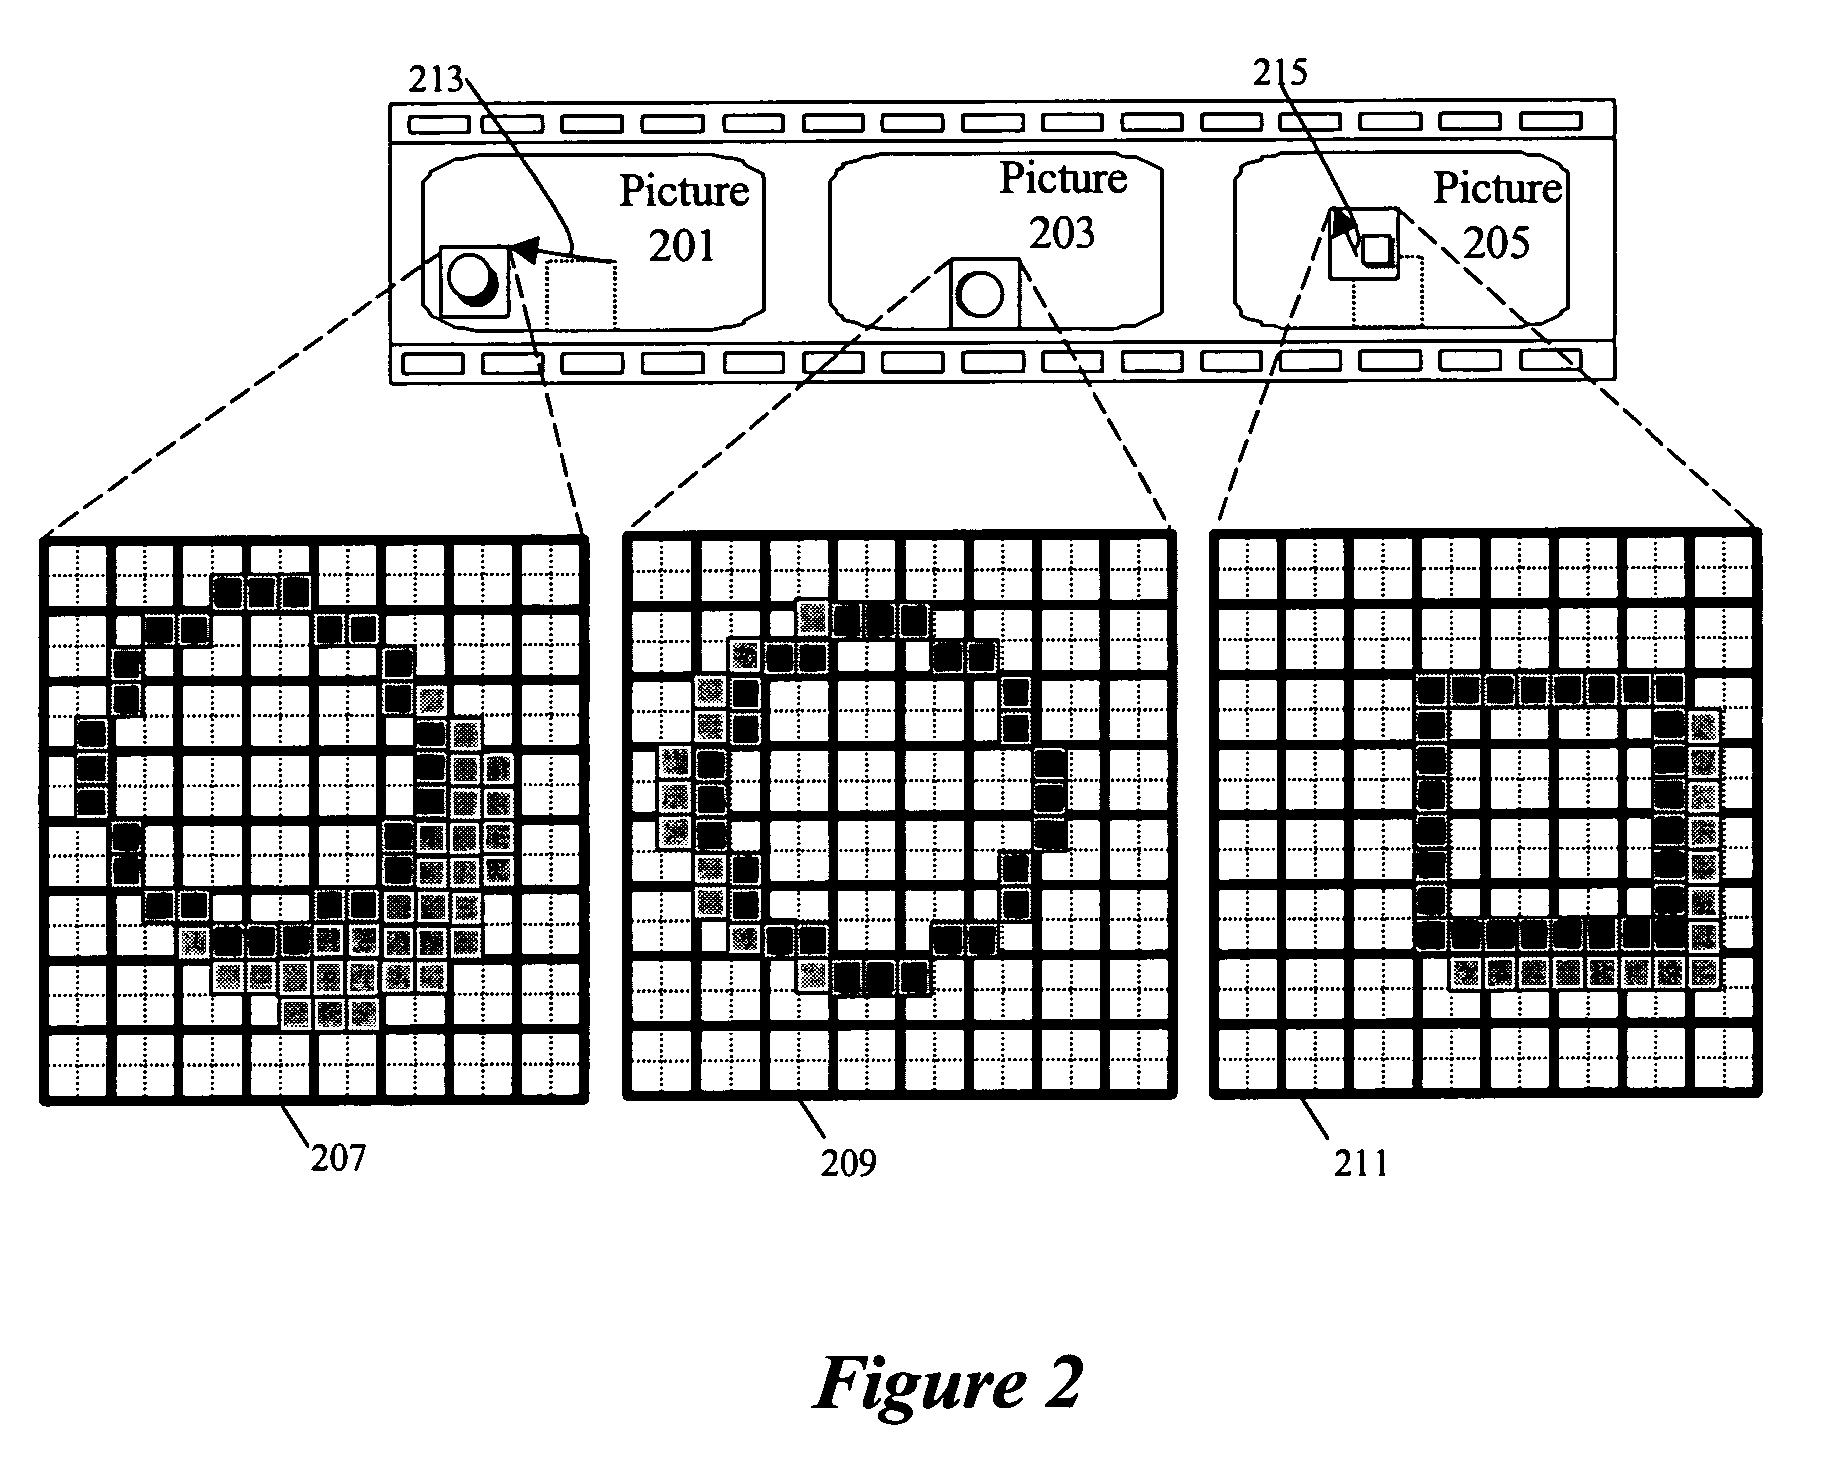 Method and system for noise reduction with a motion compensated temporal filter